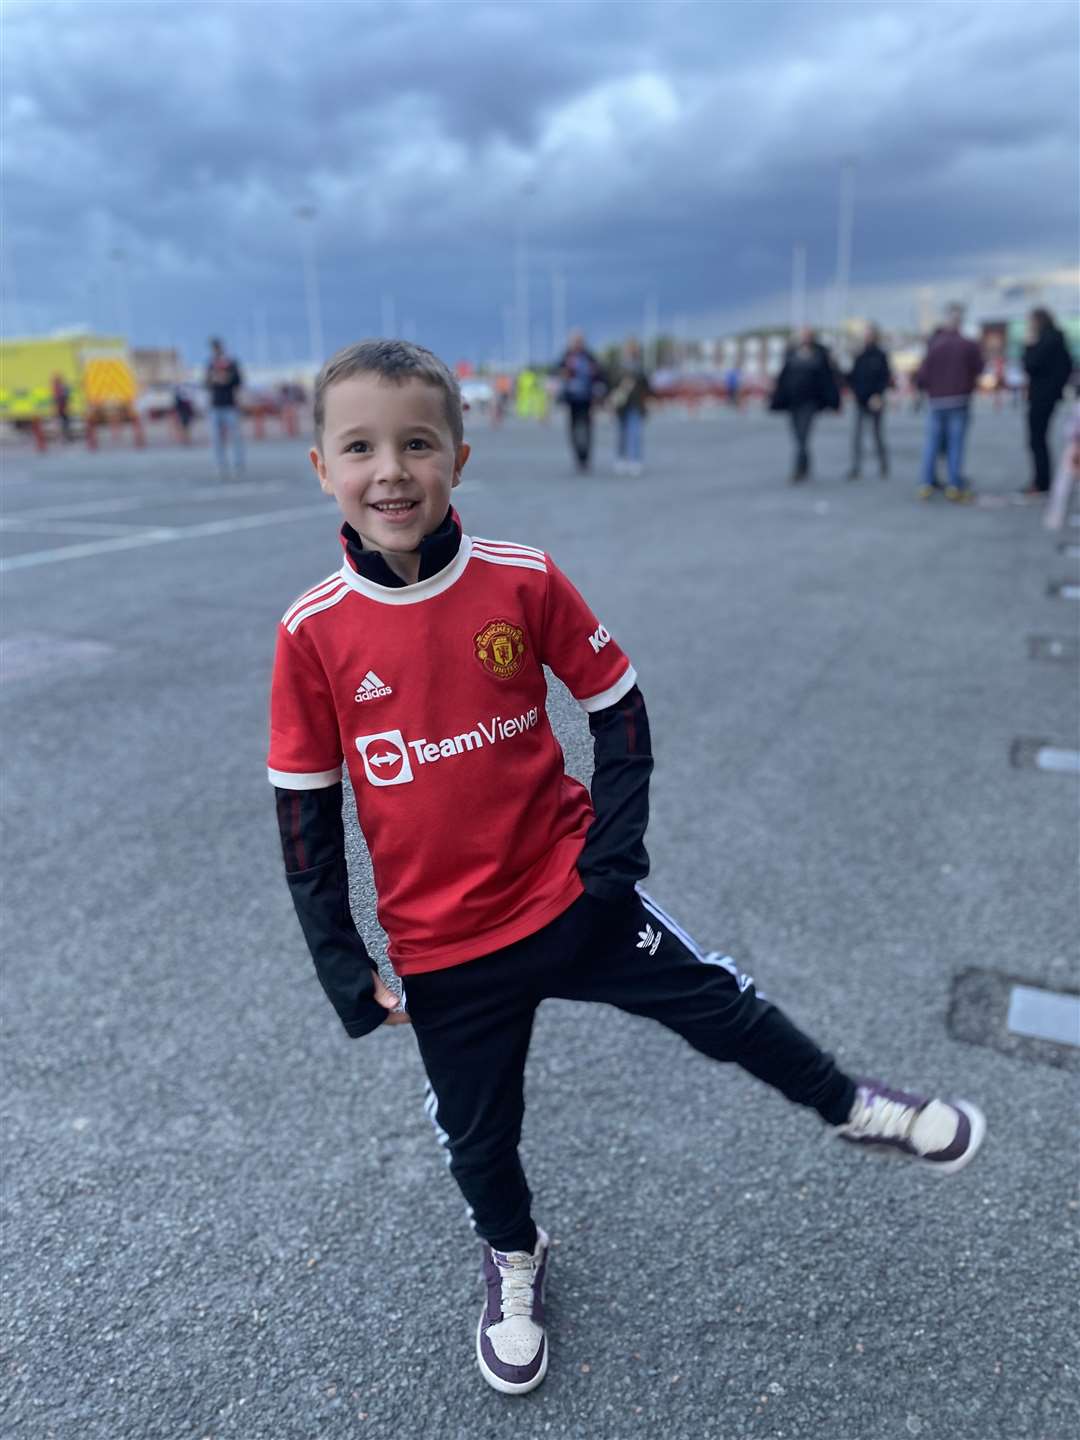 Harvey Goodman is to take part in a 40-mile walk to raise money for Alder Hey Children’s Hospital, where his cousin is (Naiomi Goodman)